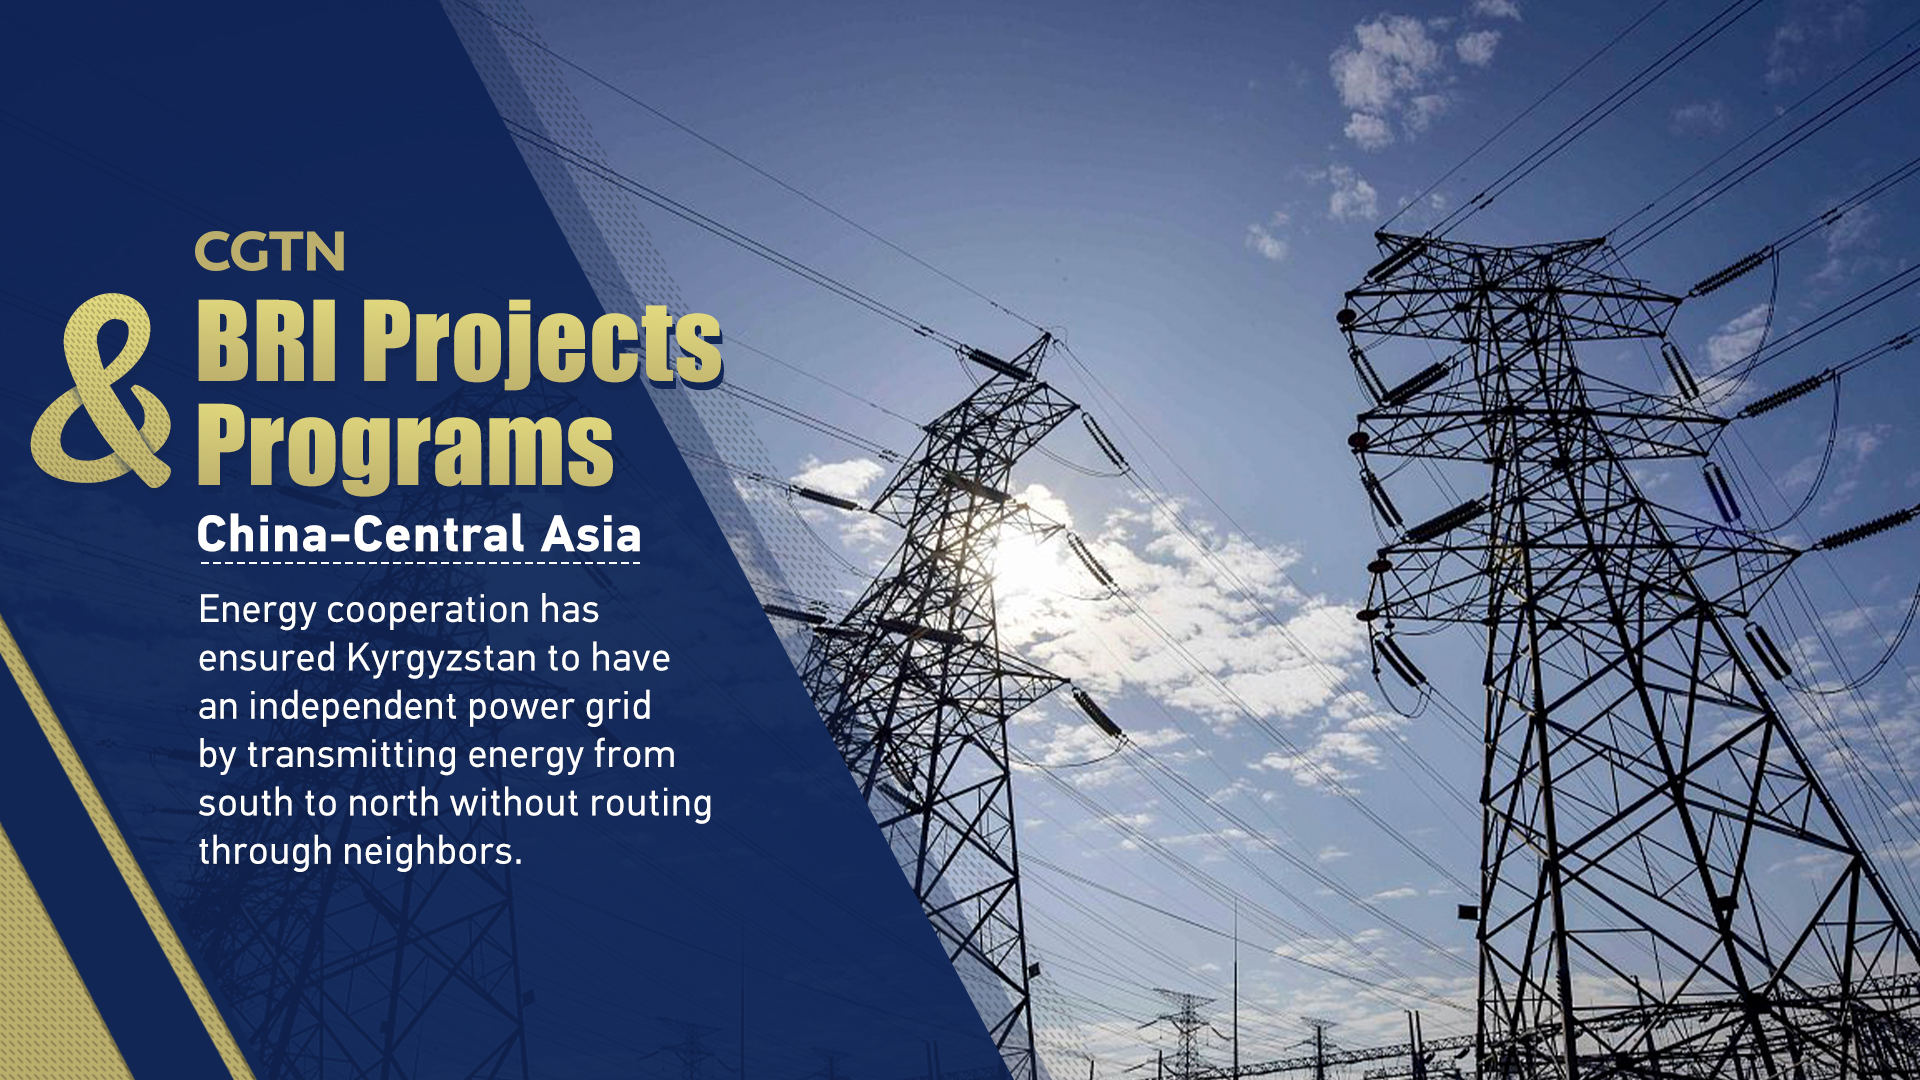 China-Central Asia: Kyrgyzstan secures independent power grid